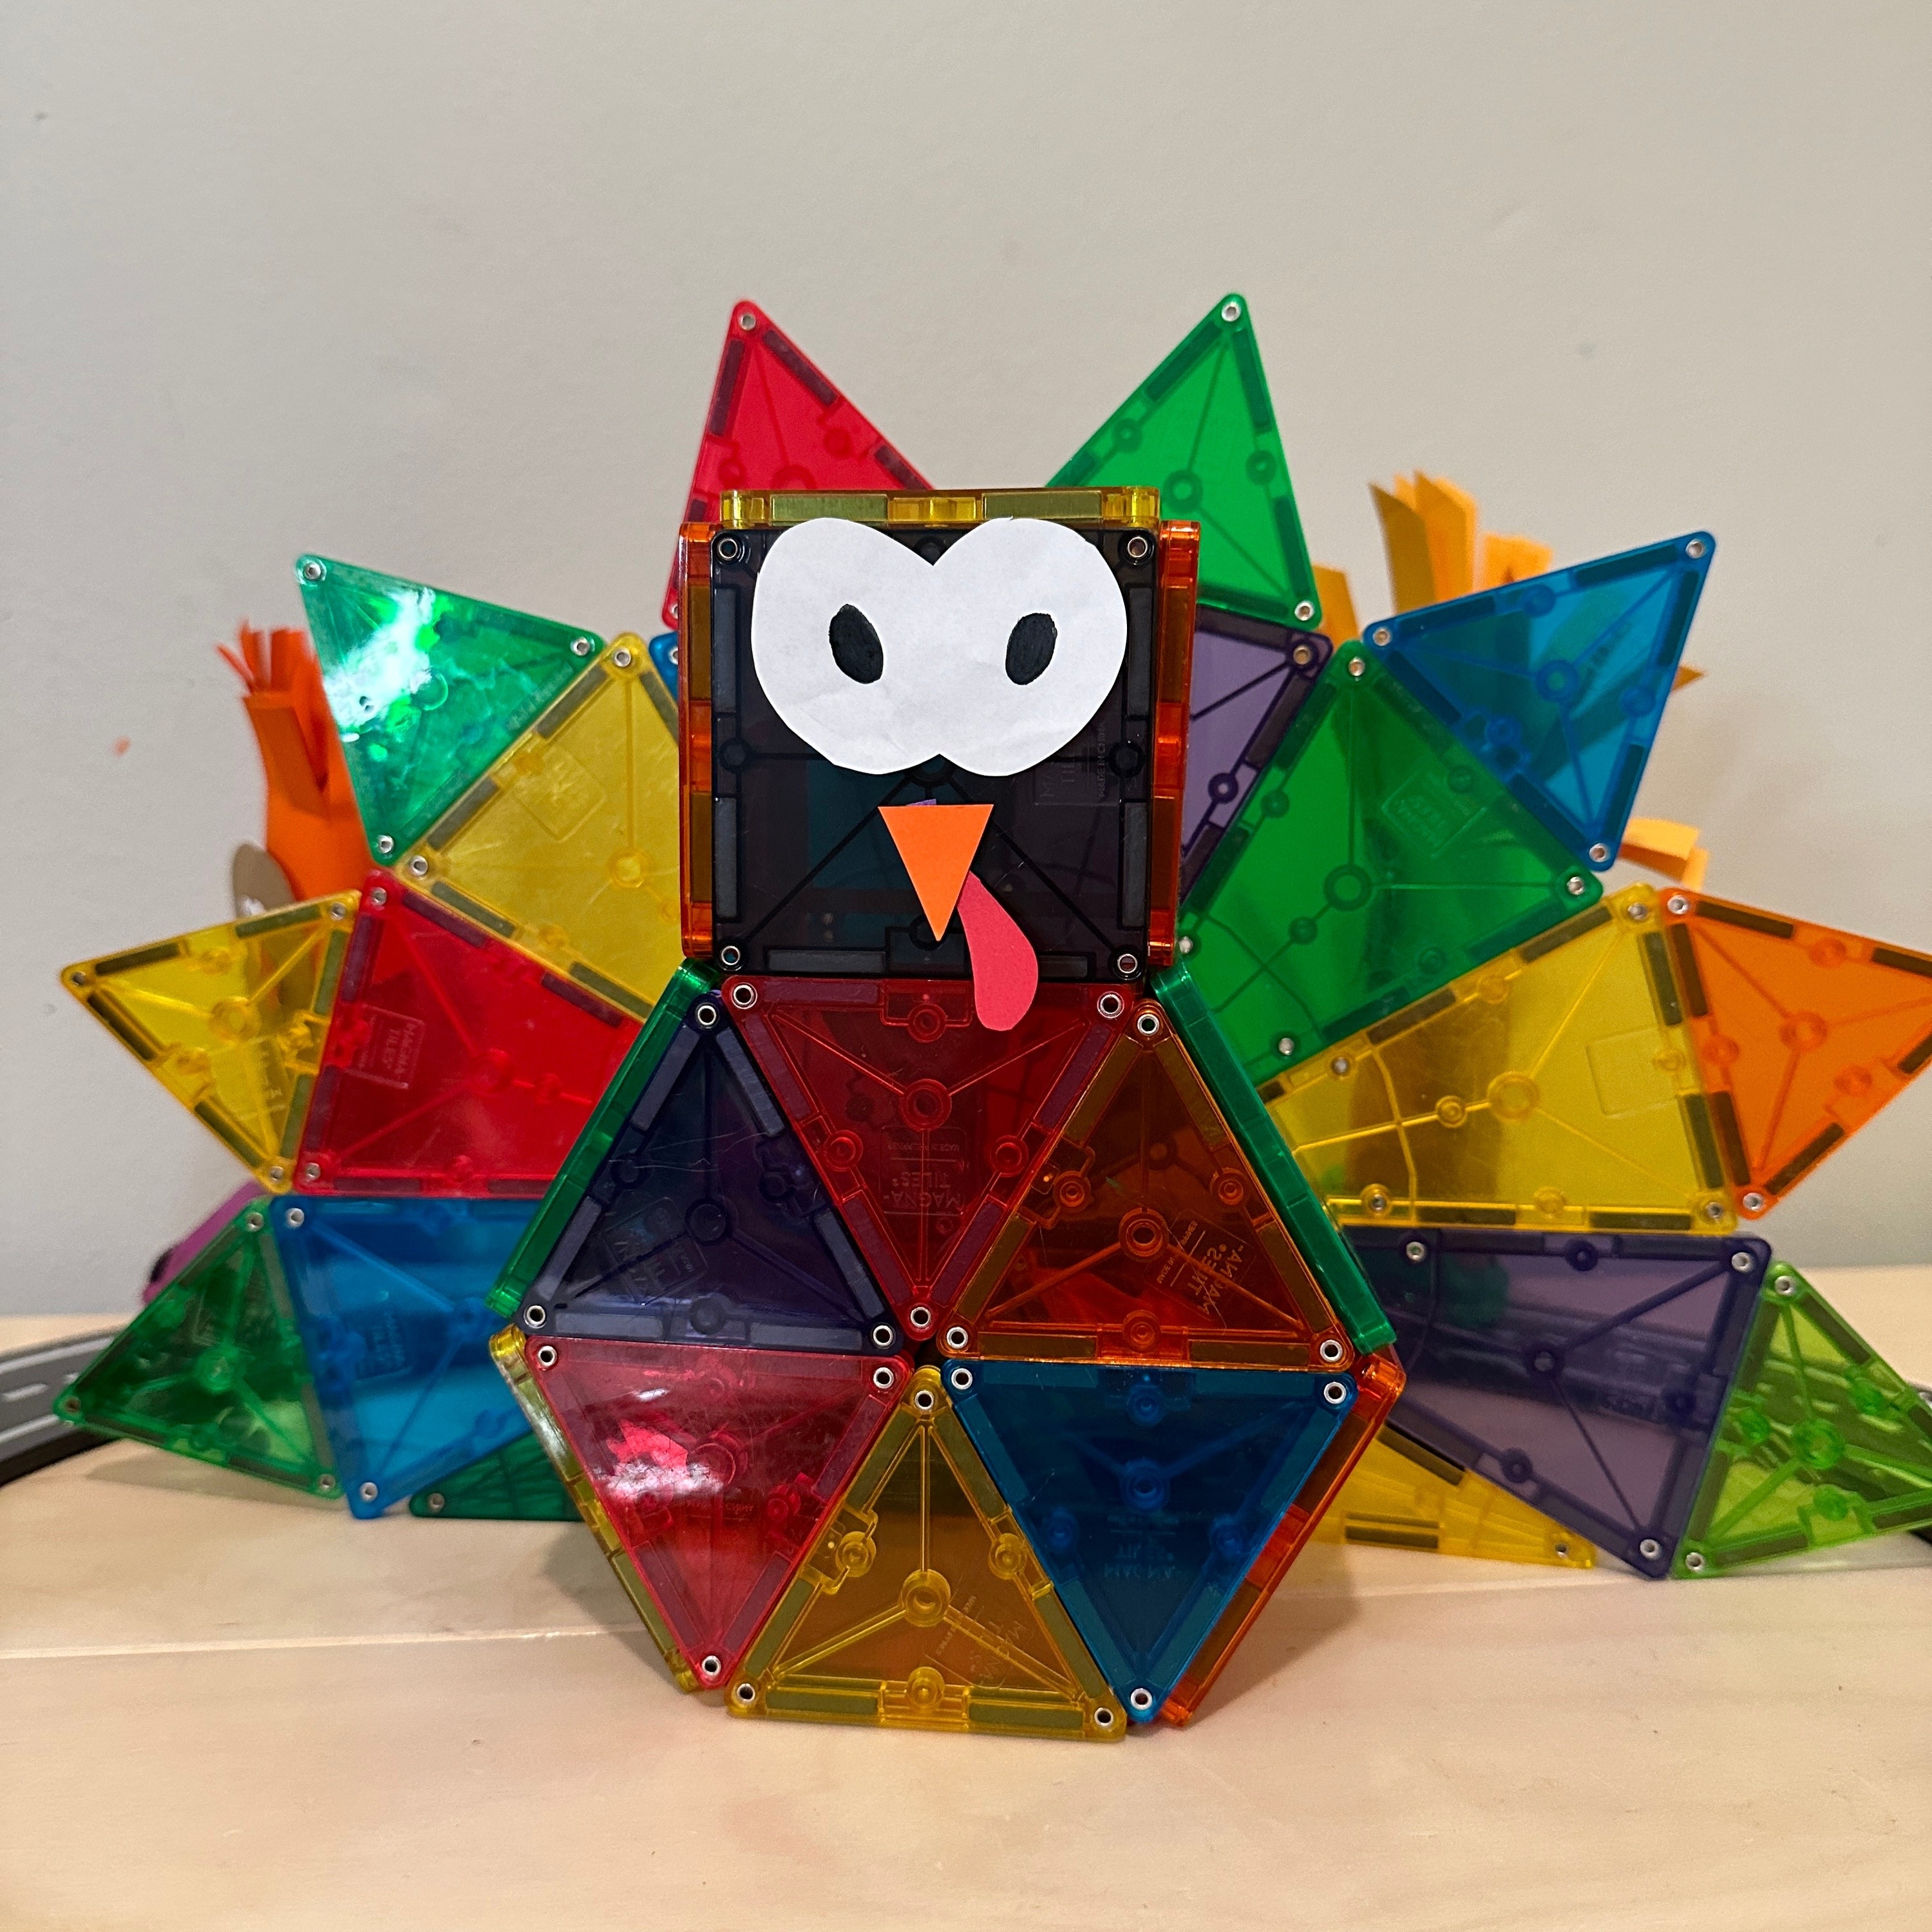 MAGNA-TILES® on X: Happy Thanksgiving from MAGNA-TILES®! 🦃 We hope the  day is filled with lots of love, laughter & great company. What are you  most grateful for this year? #MAGNATILES #holiday #